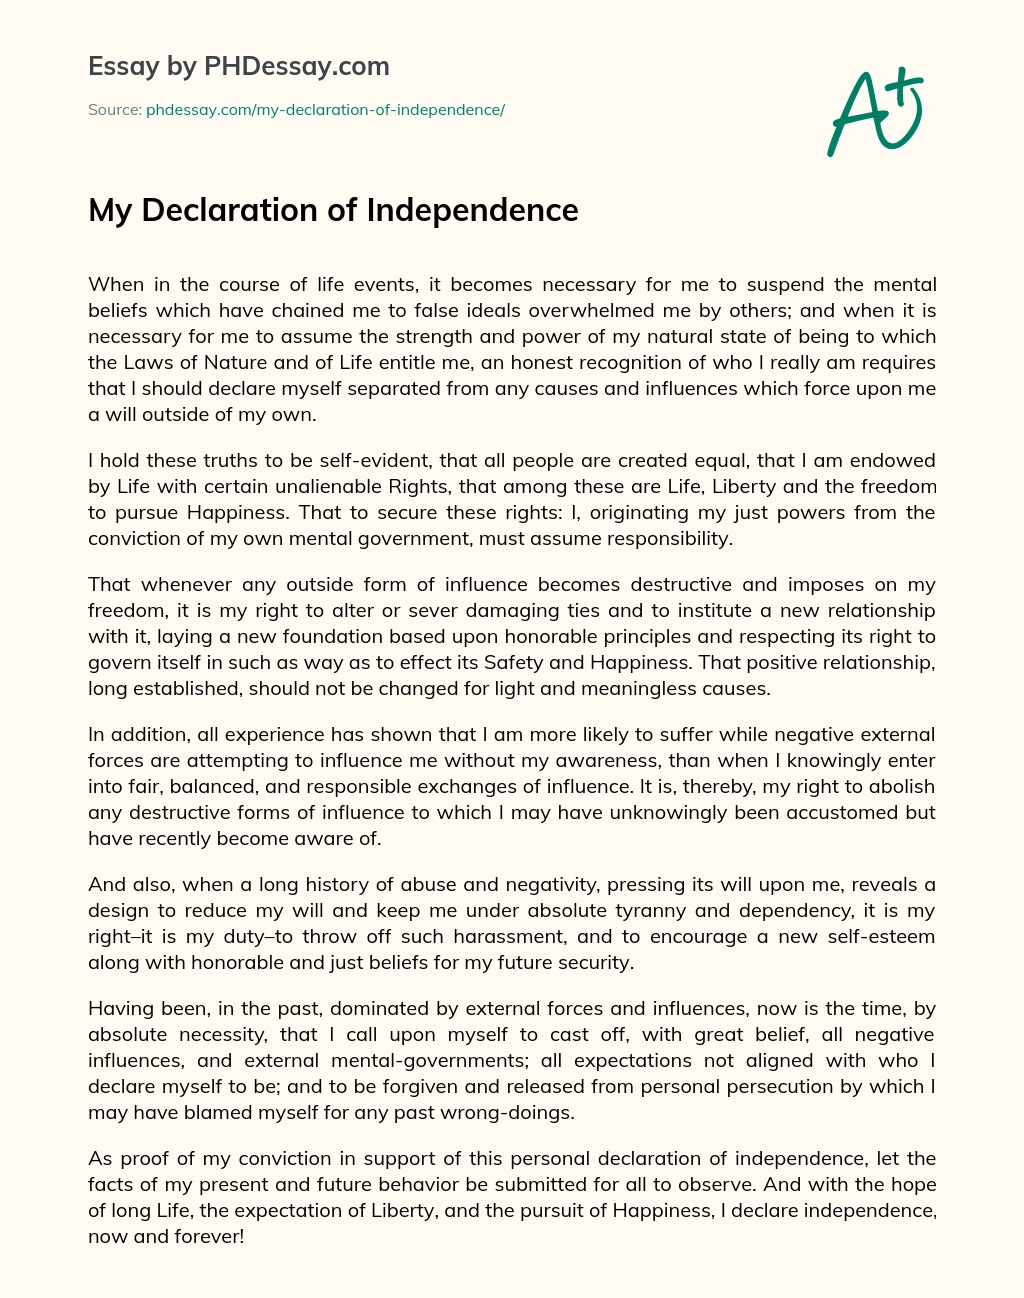 Реферат: Declaration Of Independence And Its Influences Essay